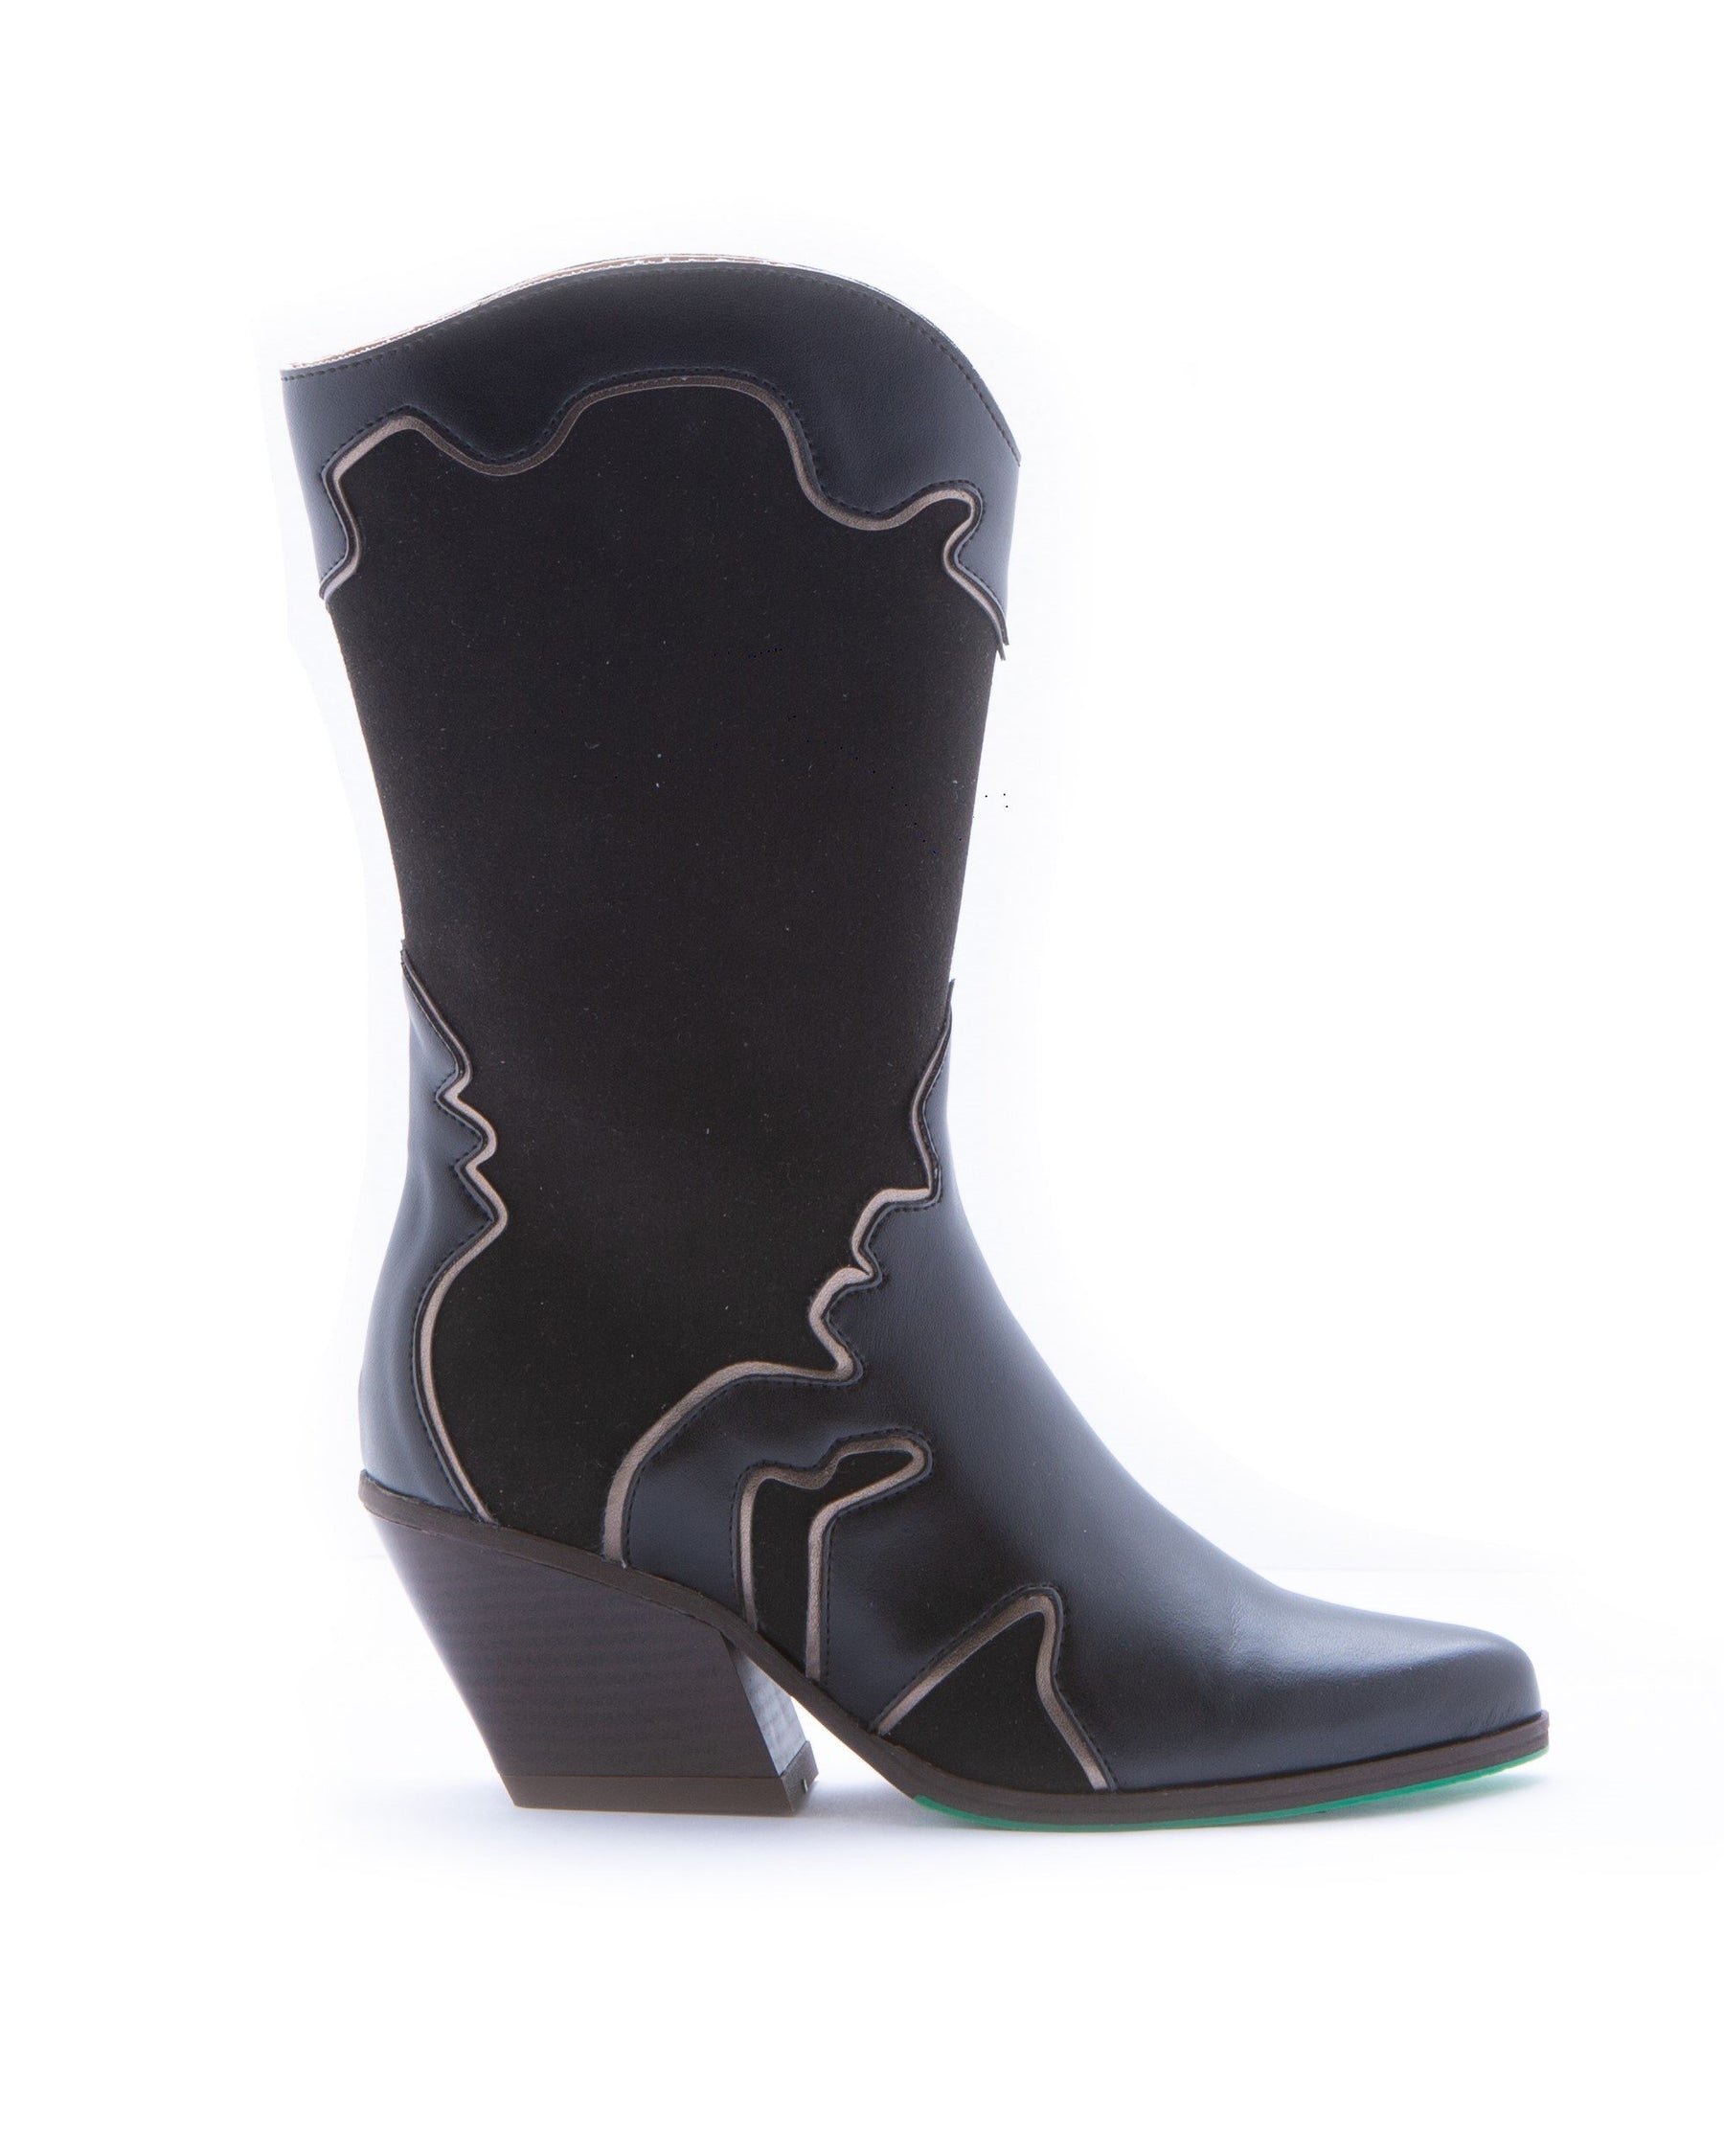 vegan leather and vegan suede cowboy boots in black with bronze embrodery